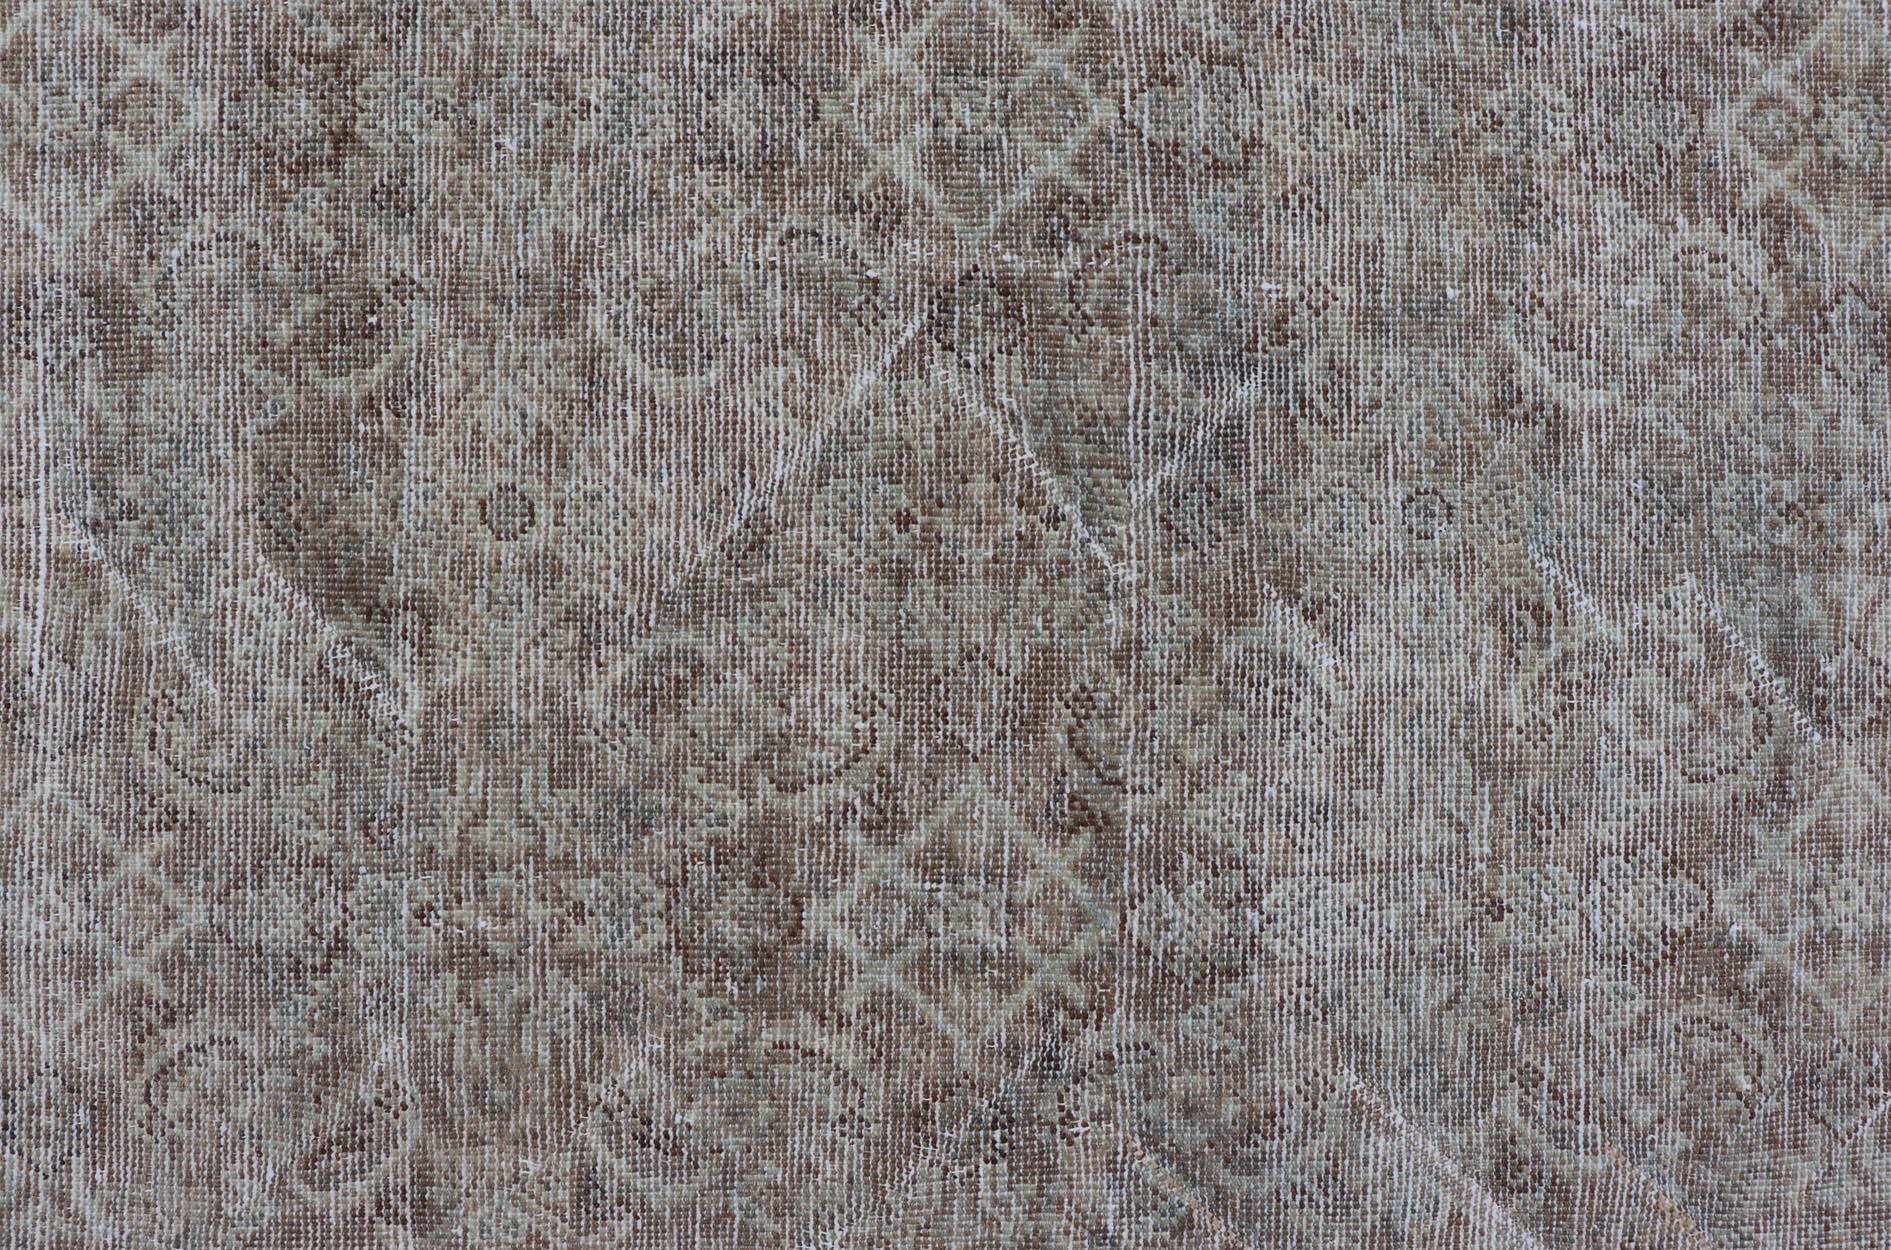 Sultanabad Antique Persian Distressed Mahal Rug in Warm Earthy Tones with All-Over Design